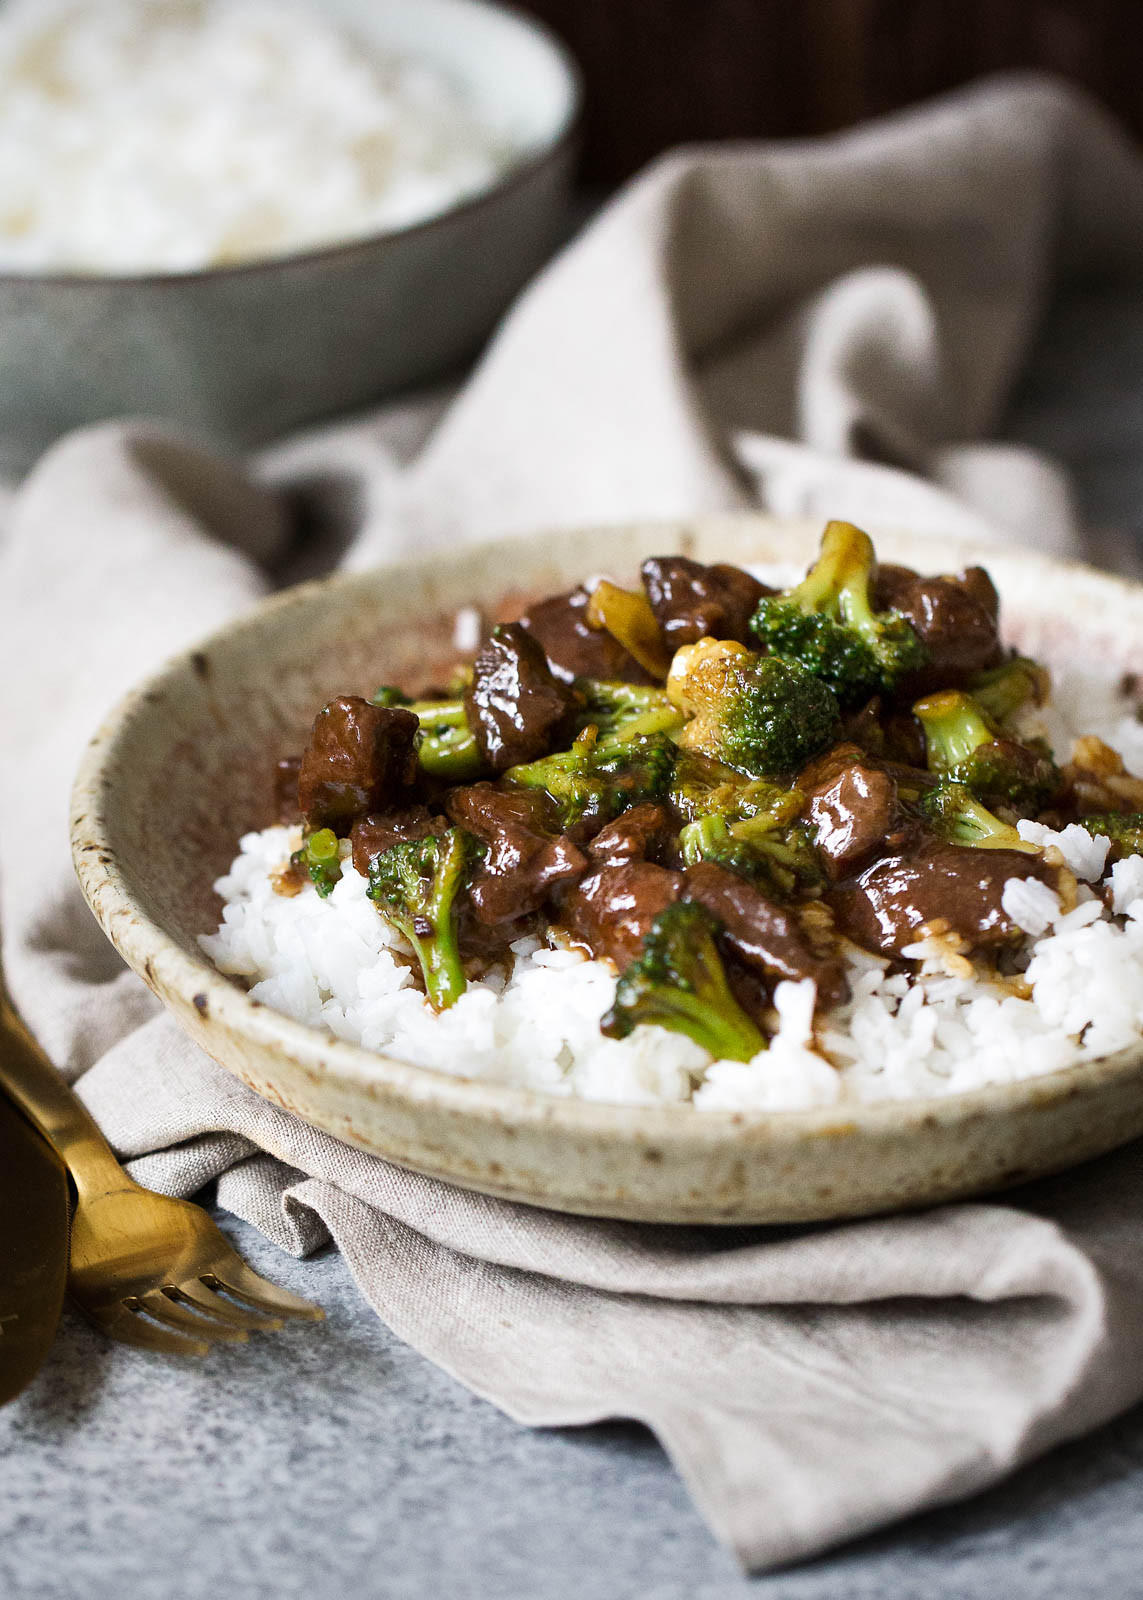 Slow Cooker Broccoli Beef
 Slow Cooker Beef and Broccoli Table for Two by Julie Chiou